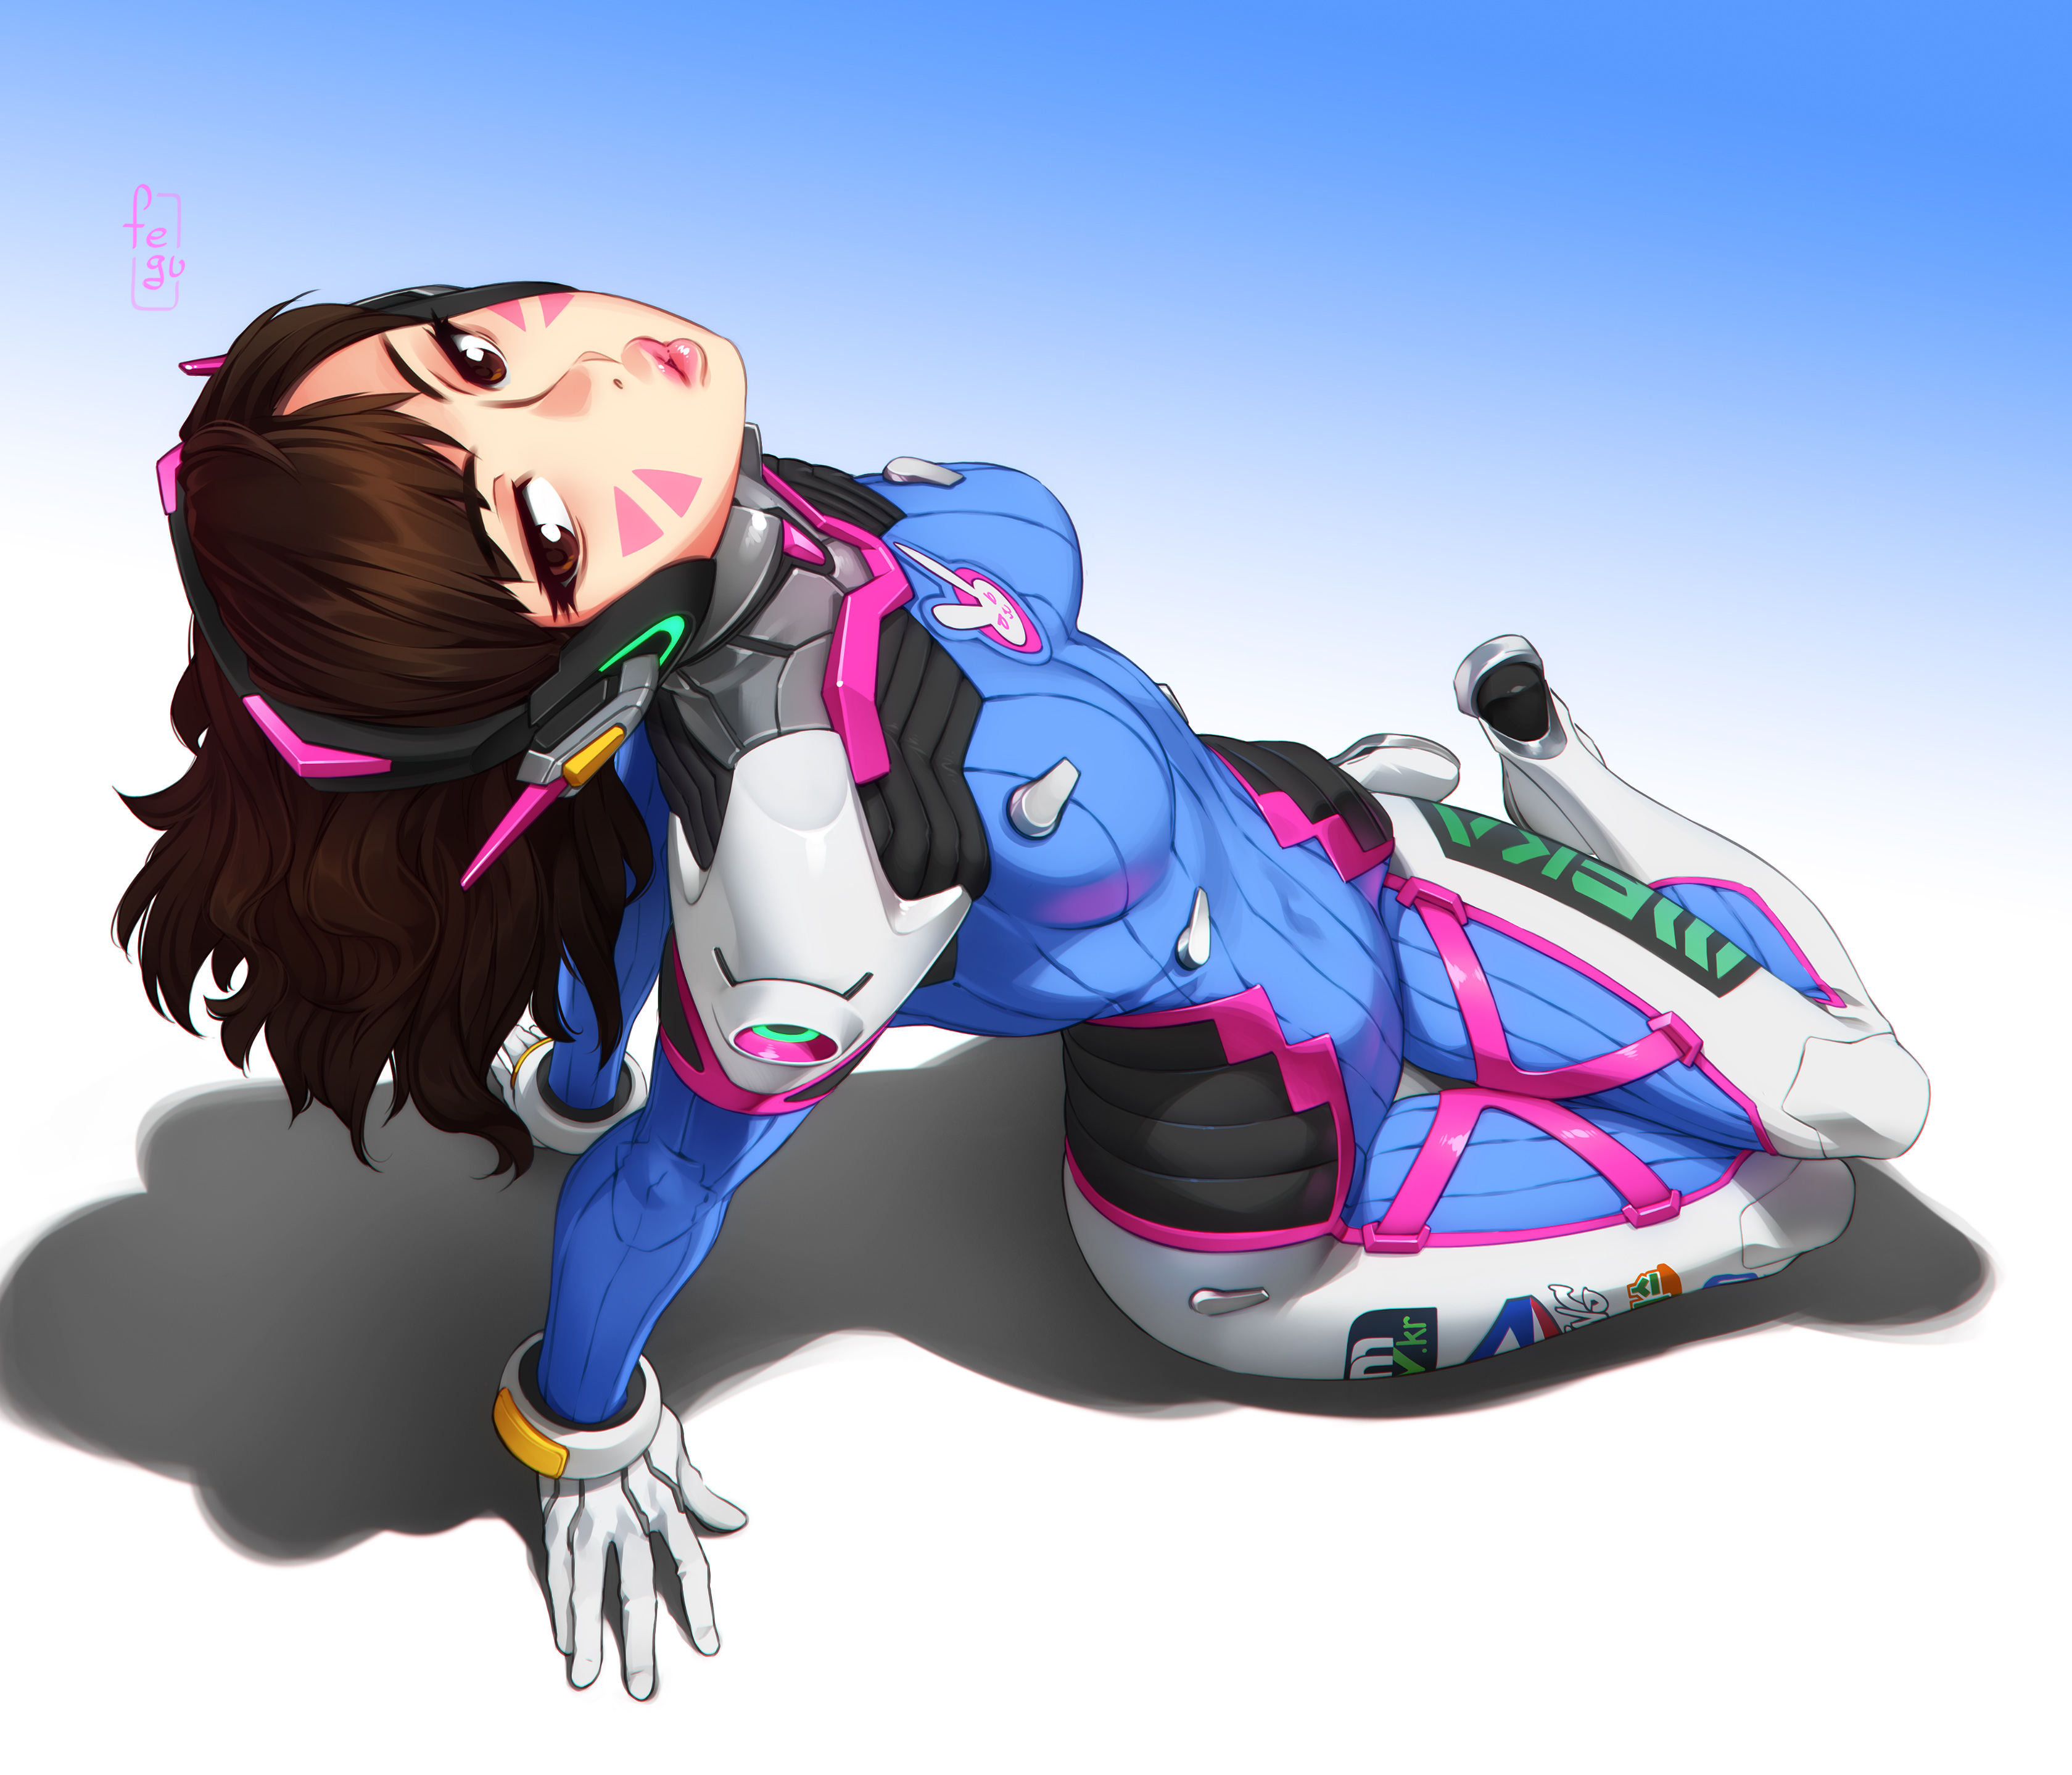 Dva Overwatch Arched Back Feguimel Overwatch Video Games Video Game Girls Plugsuit